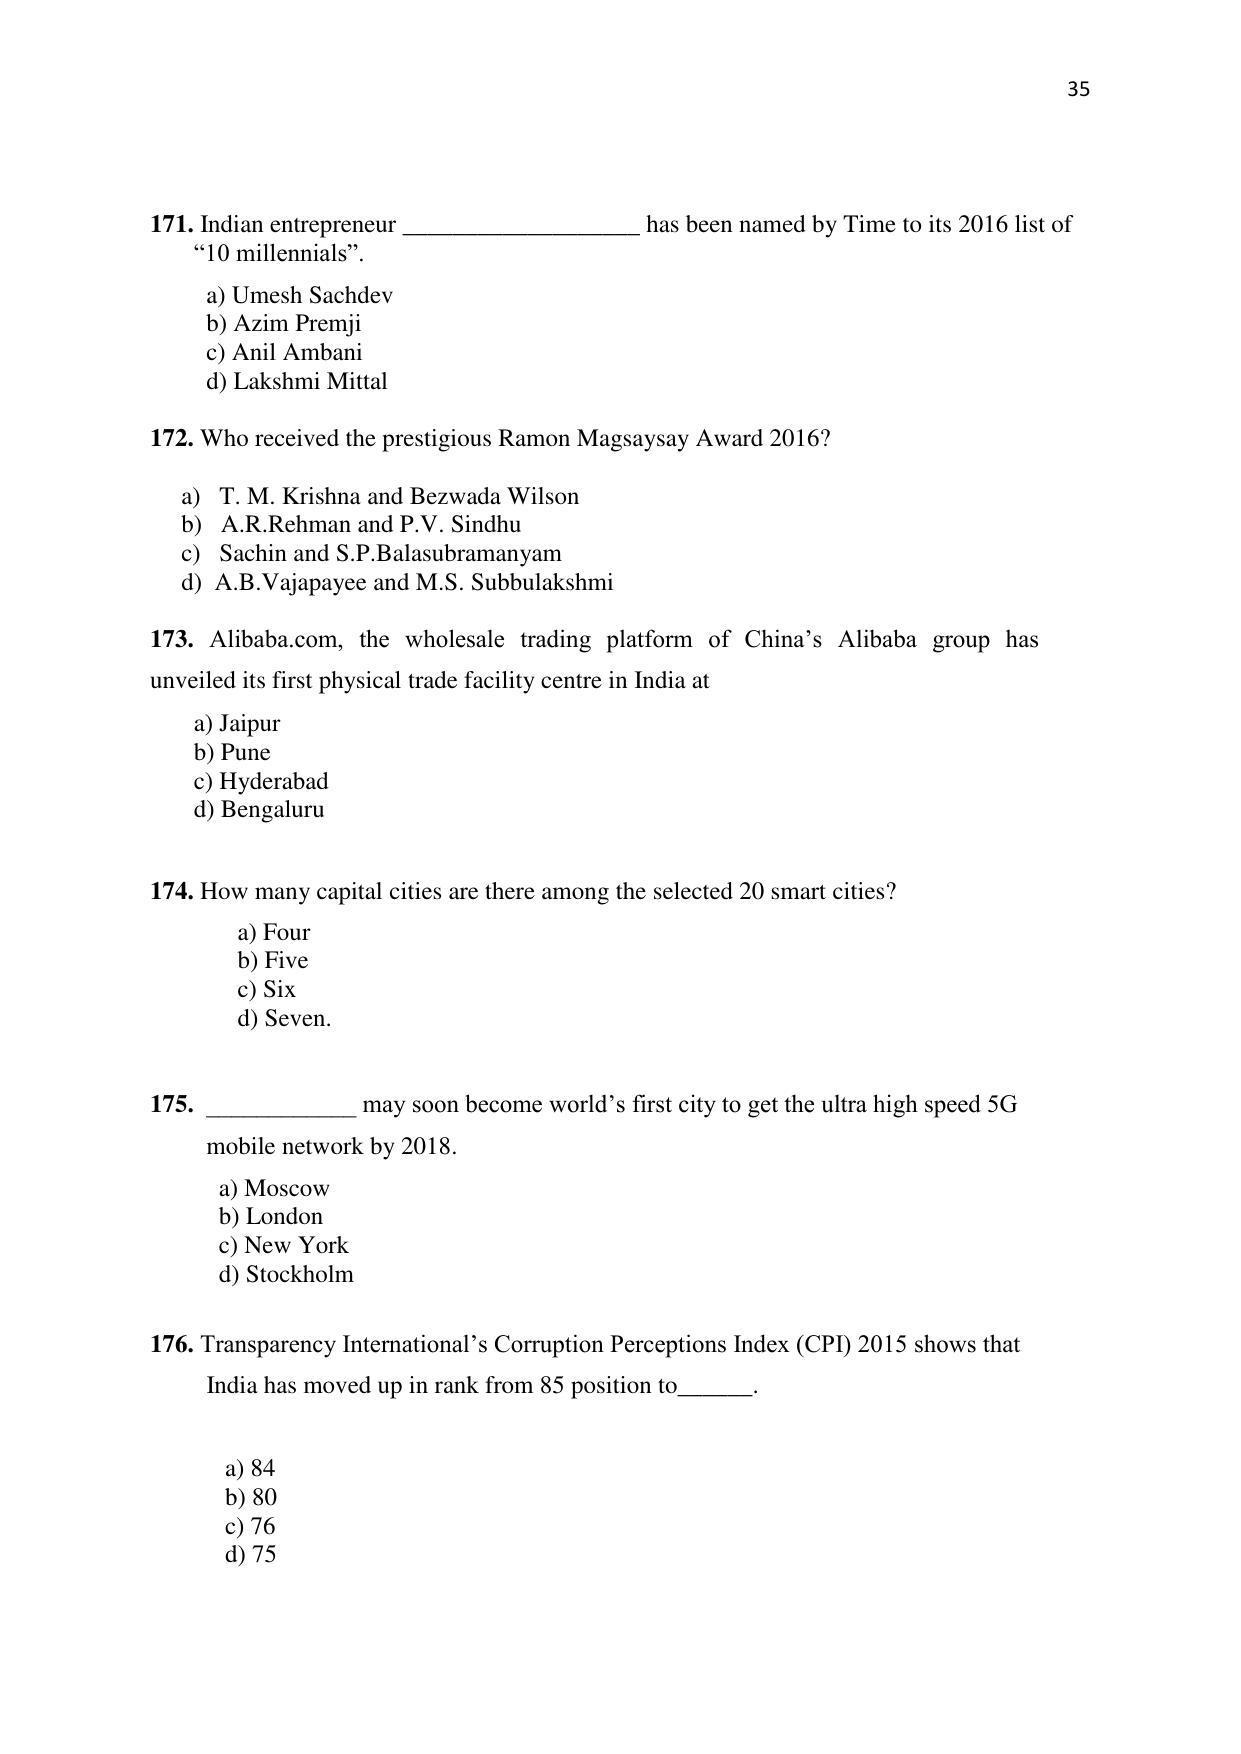 KMAT Question Papers - November 2016 - Page 35